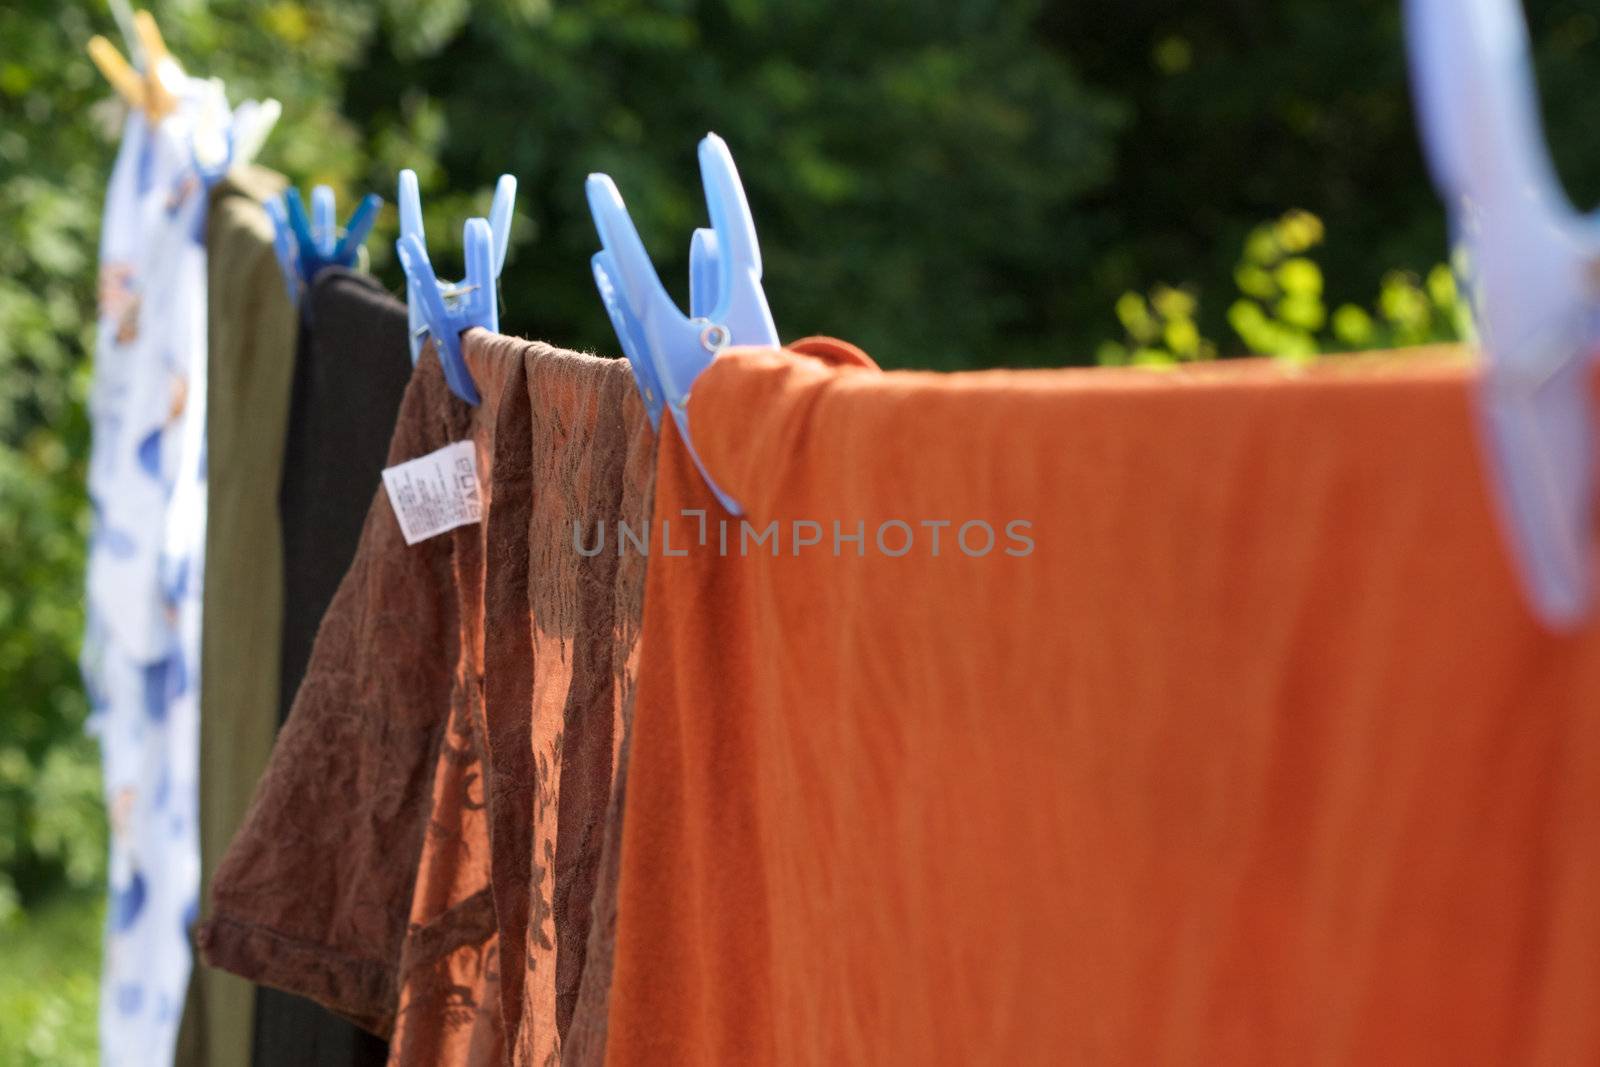 Clothes hanging on a rope to dry outside